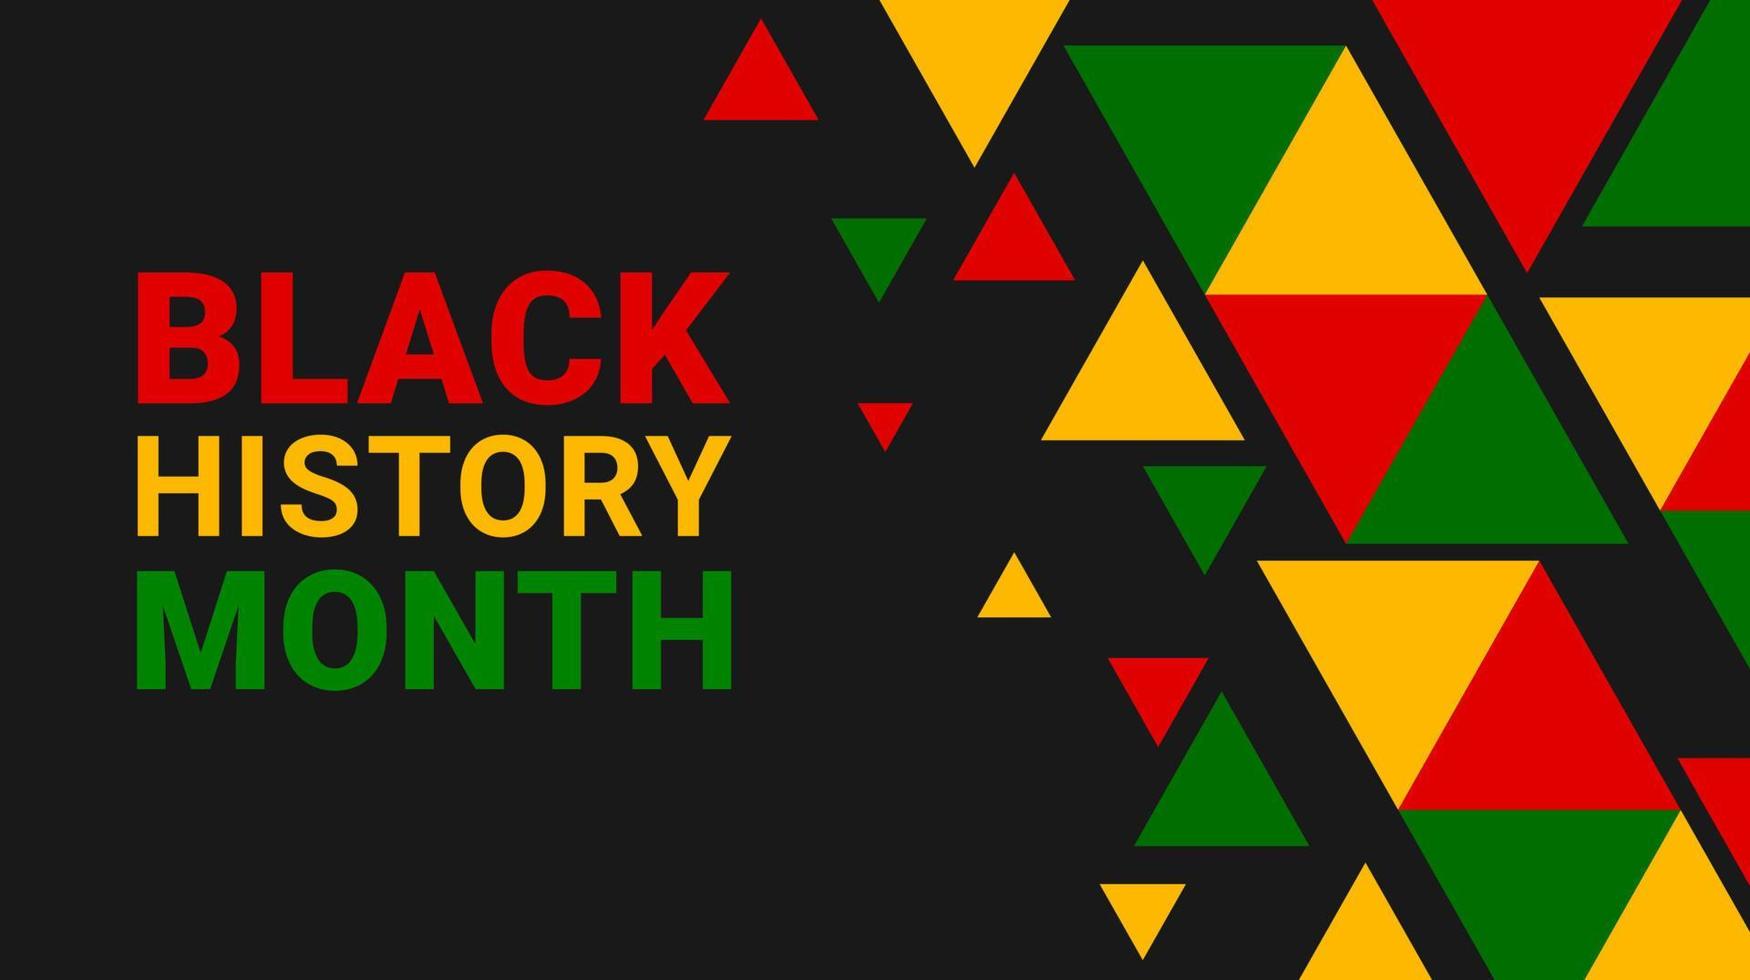 Black history month. Celebration of African American history. Celebrated annual. Graphic design for posters banner, card, background. Vector illustration